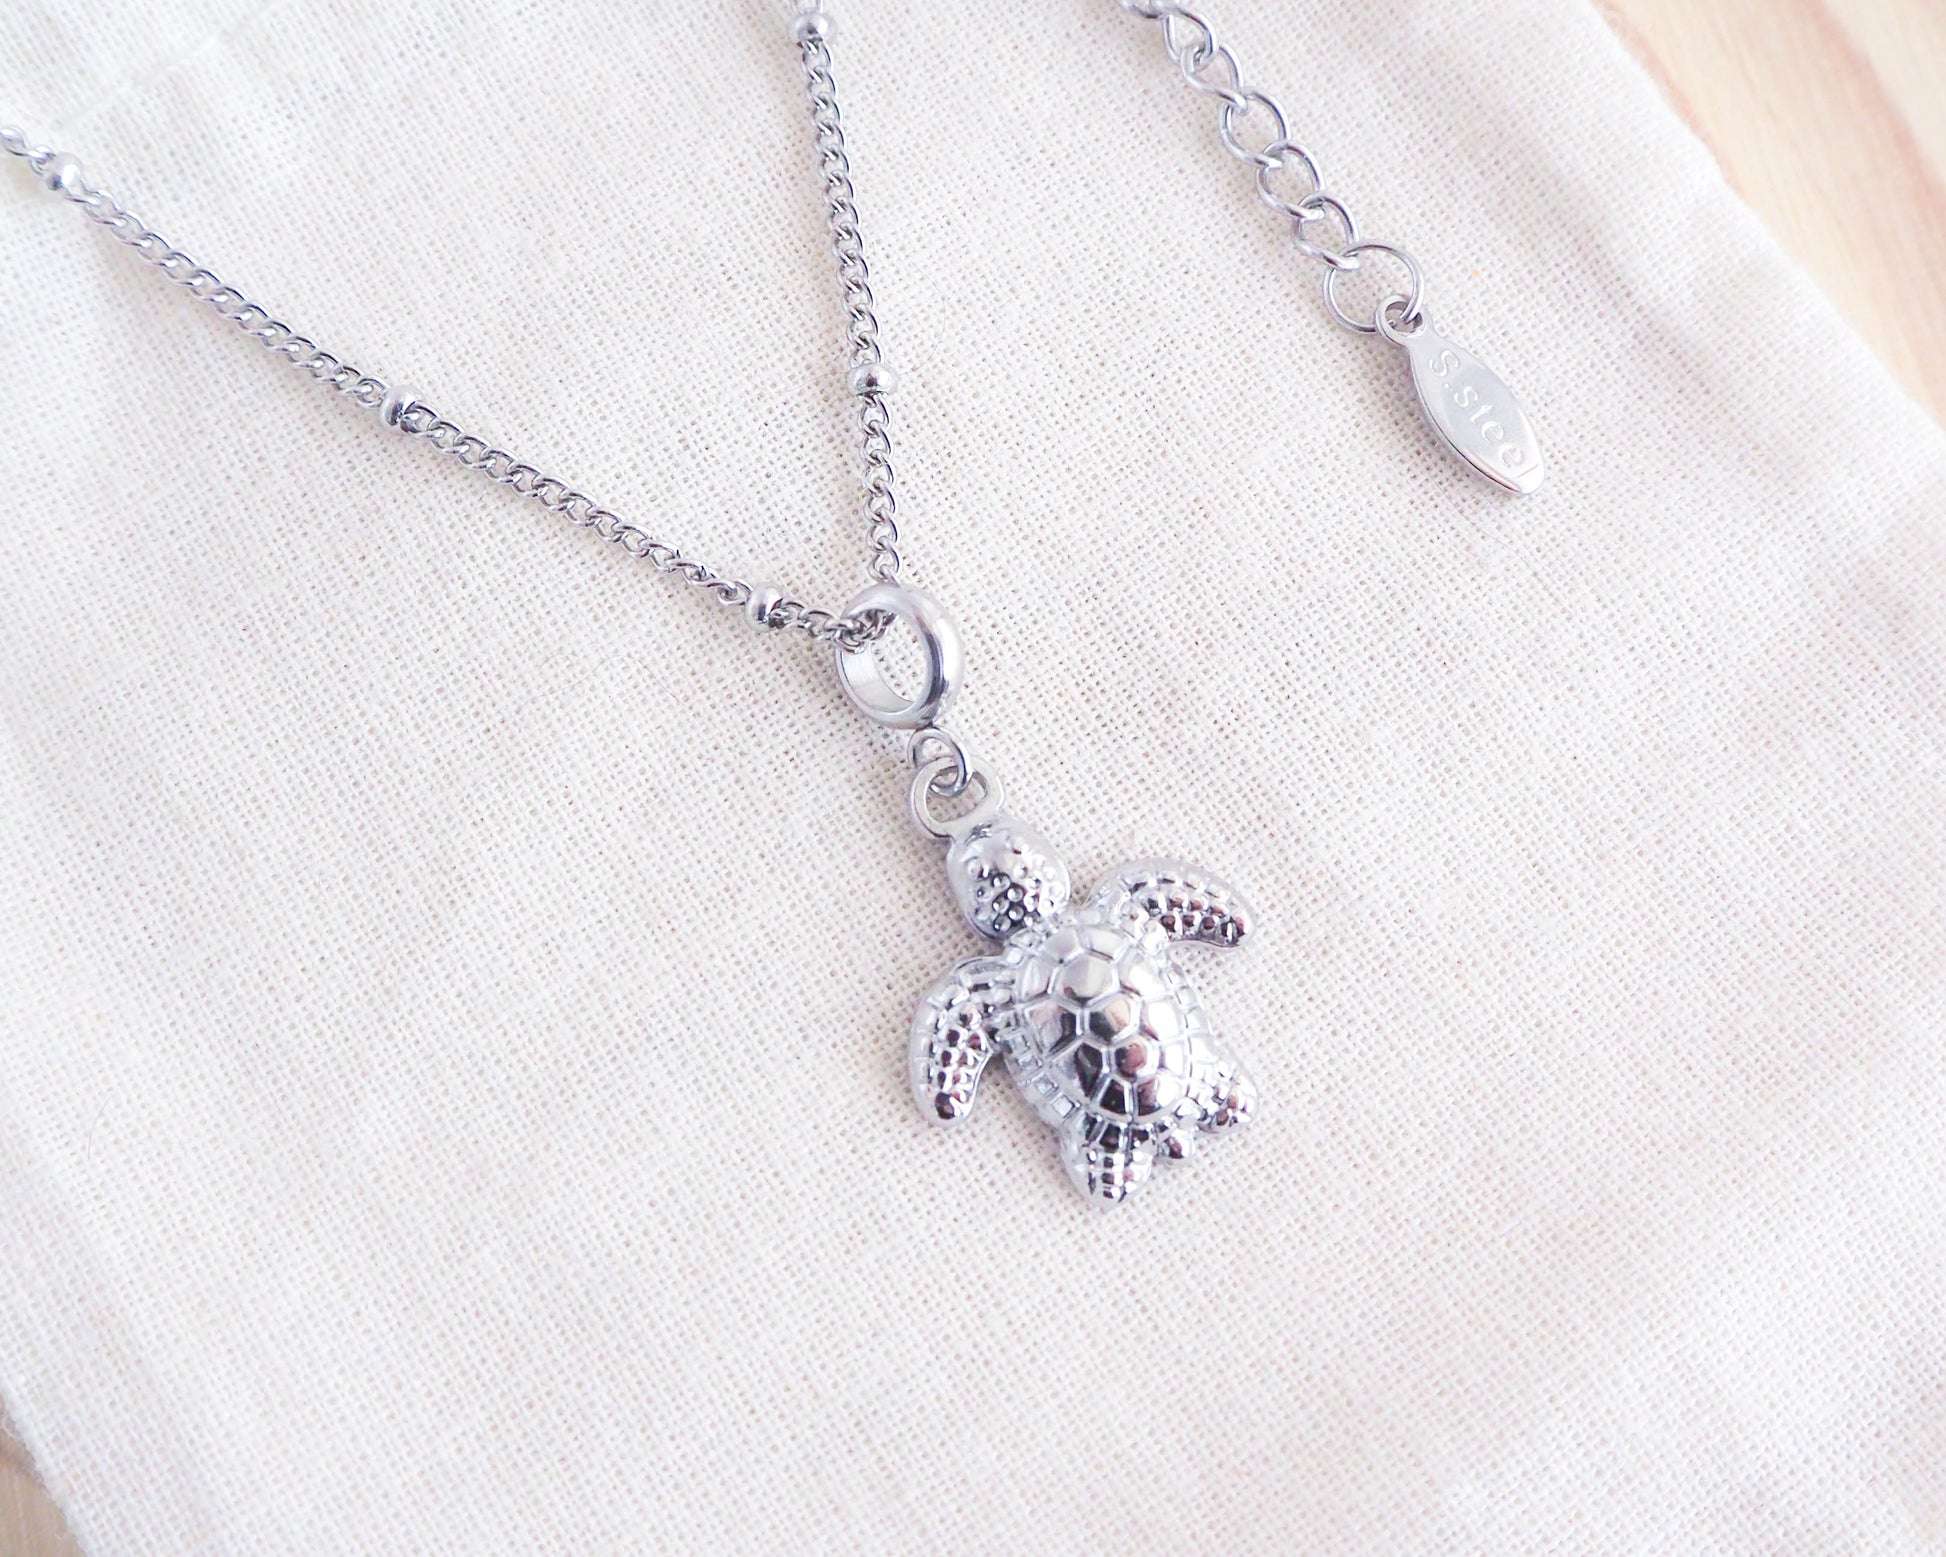 Necklace with Turtle Pendant Silver Stainless Steel 